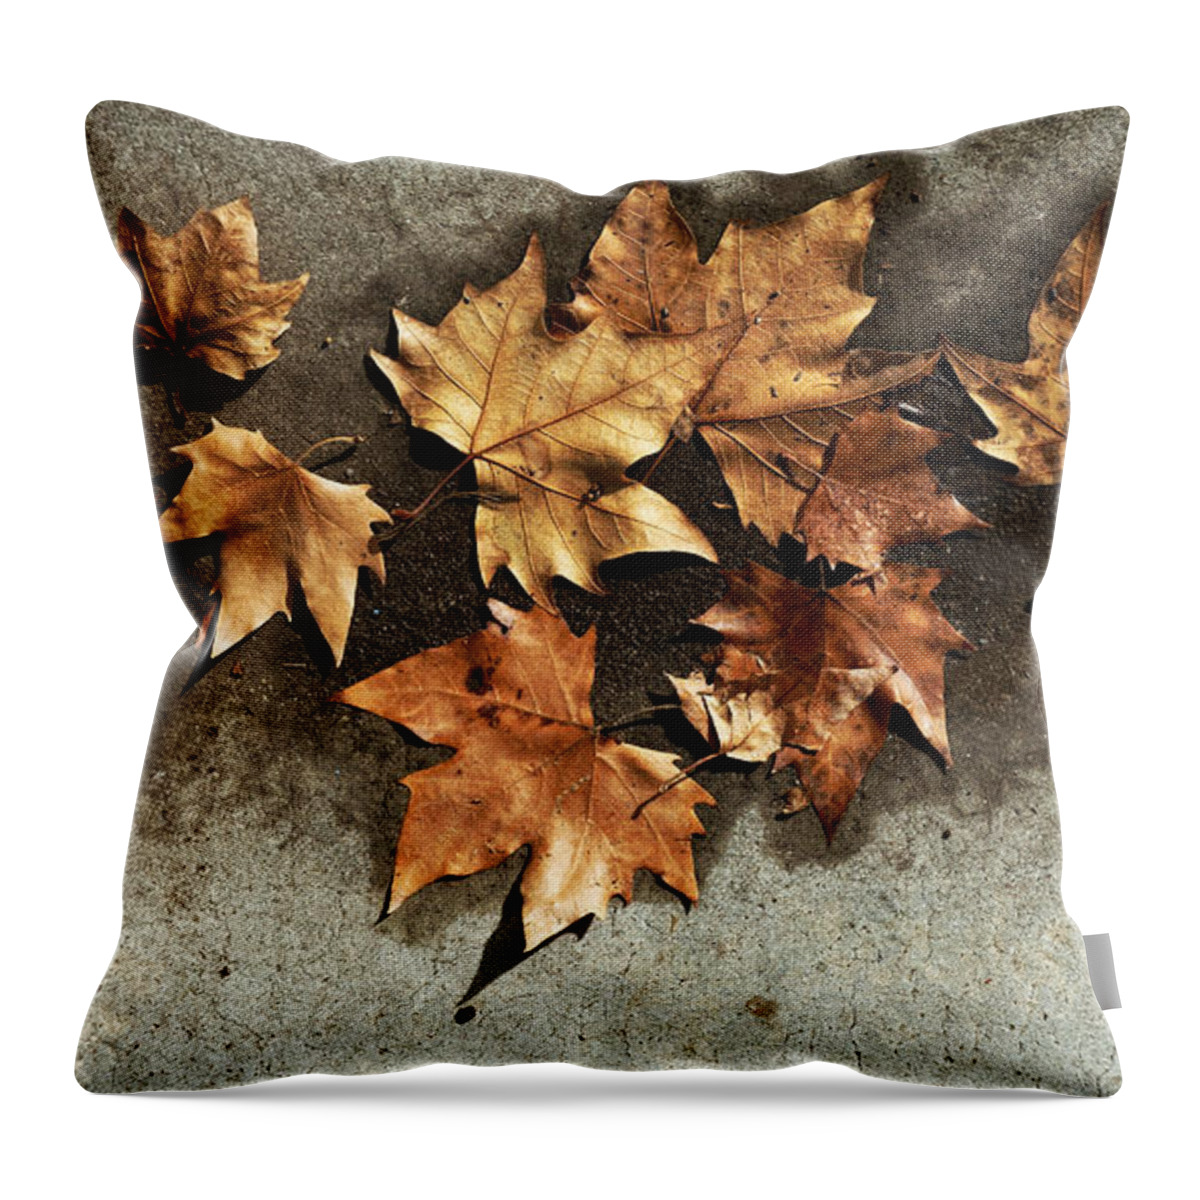 Leaves Throw Pillow featuring the photograph All The Leaves Are Brown by Wayne Sherriff